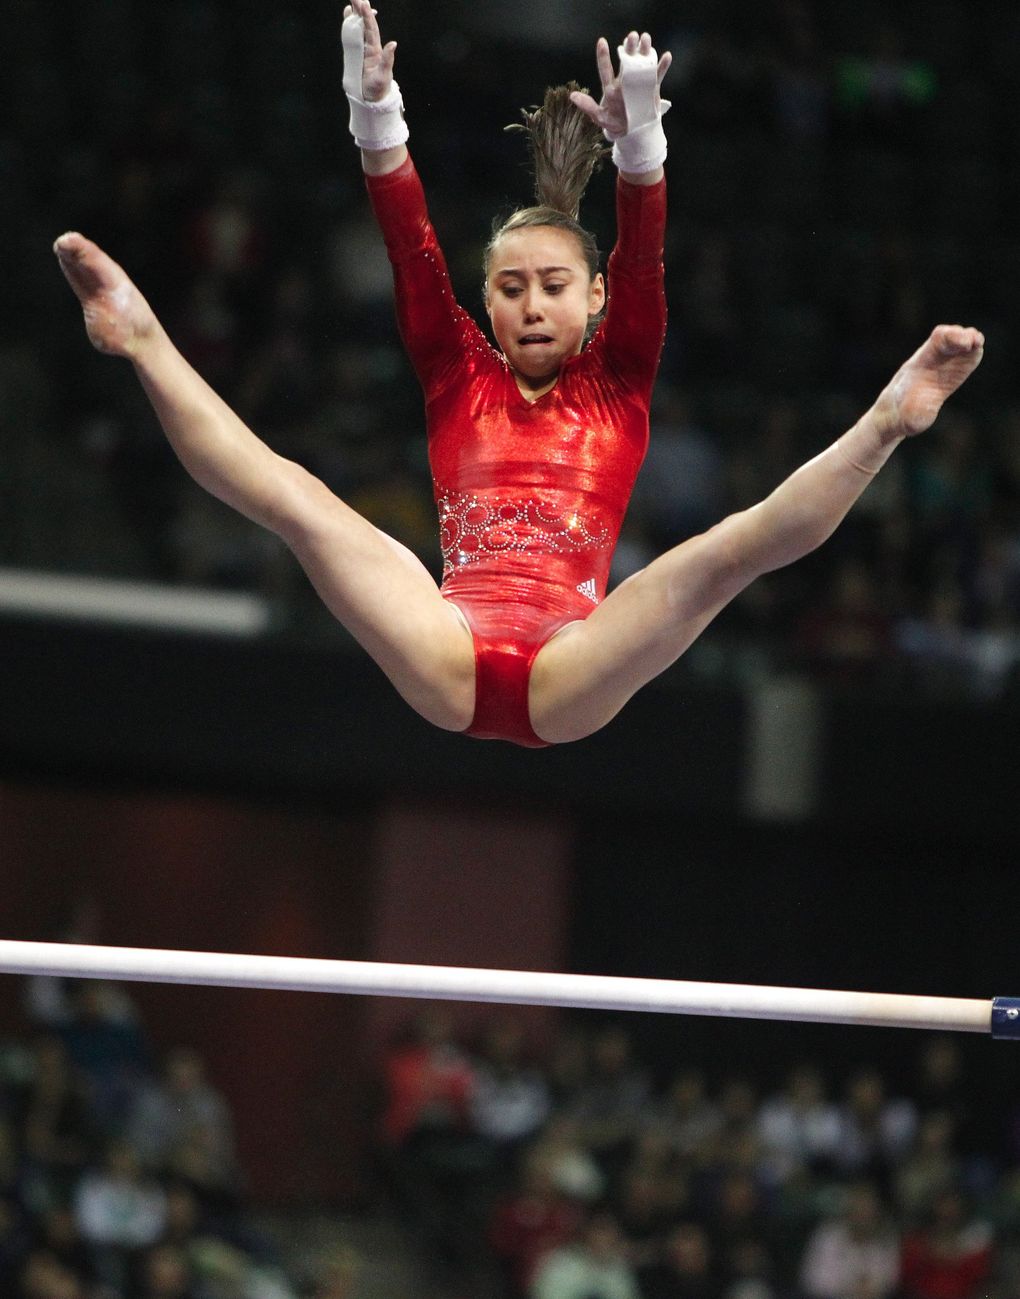 USA’s Katelyn Ohashi soars over the top bar during her routine on the